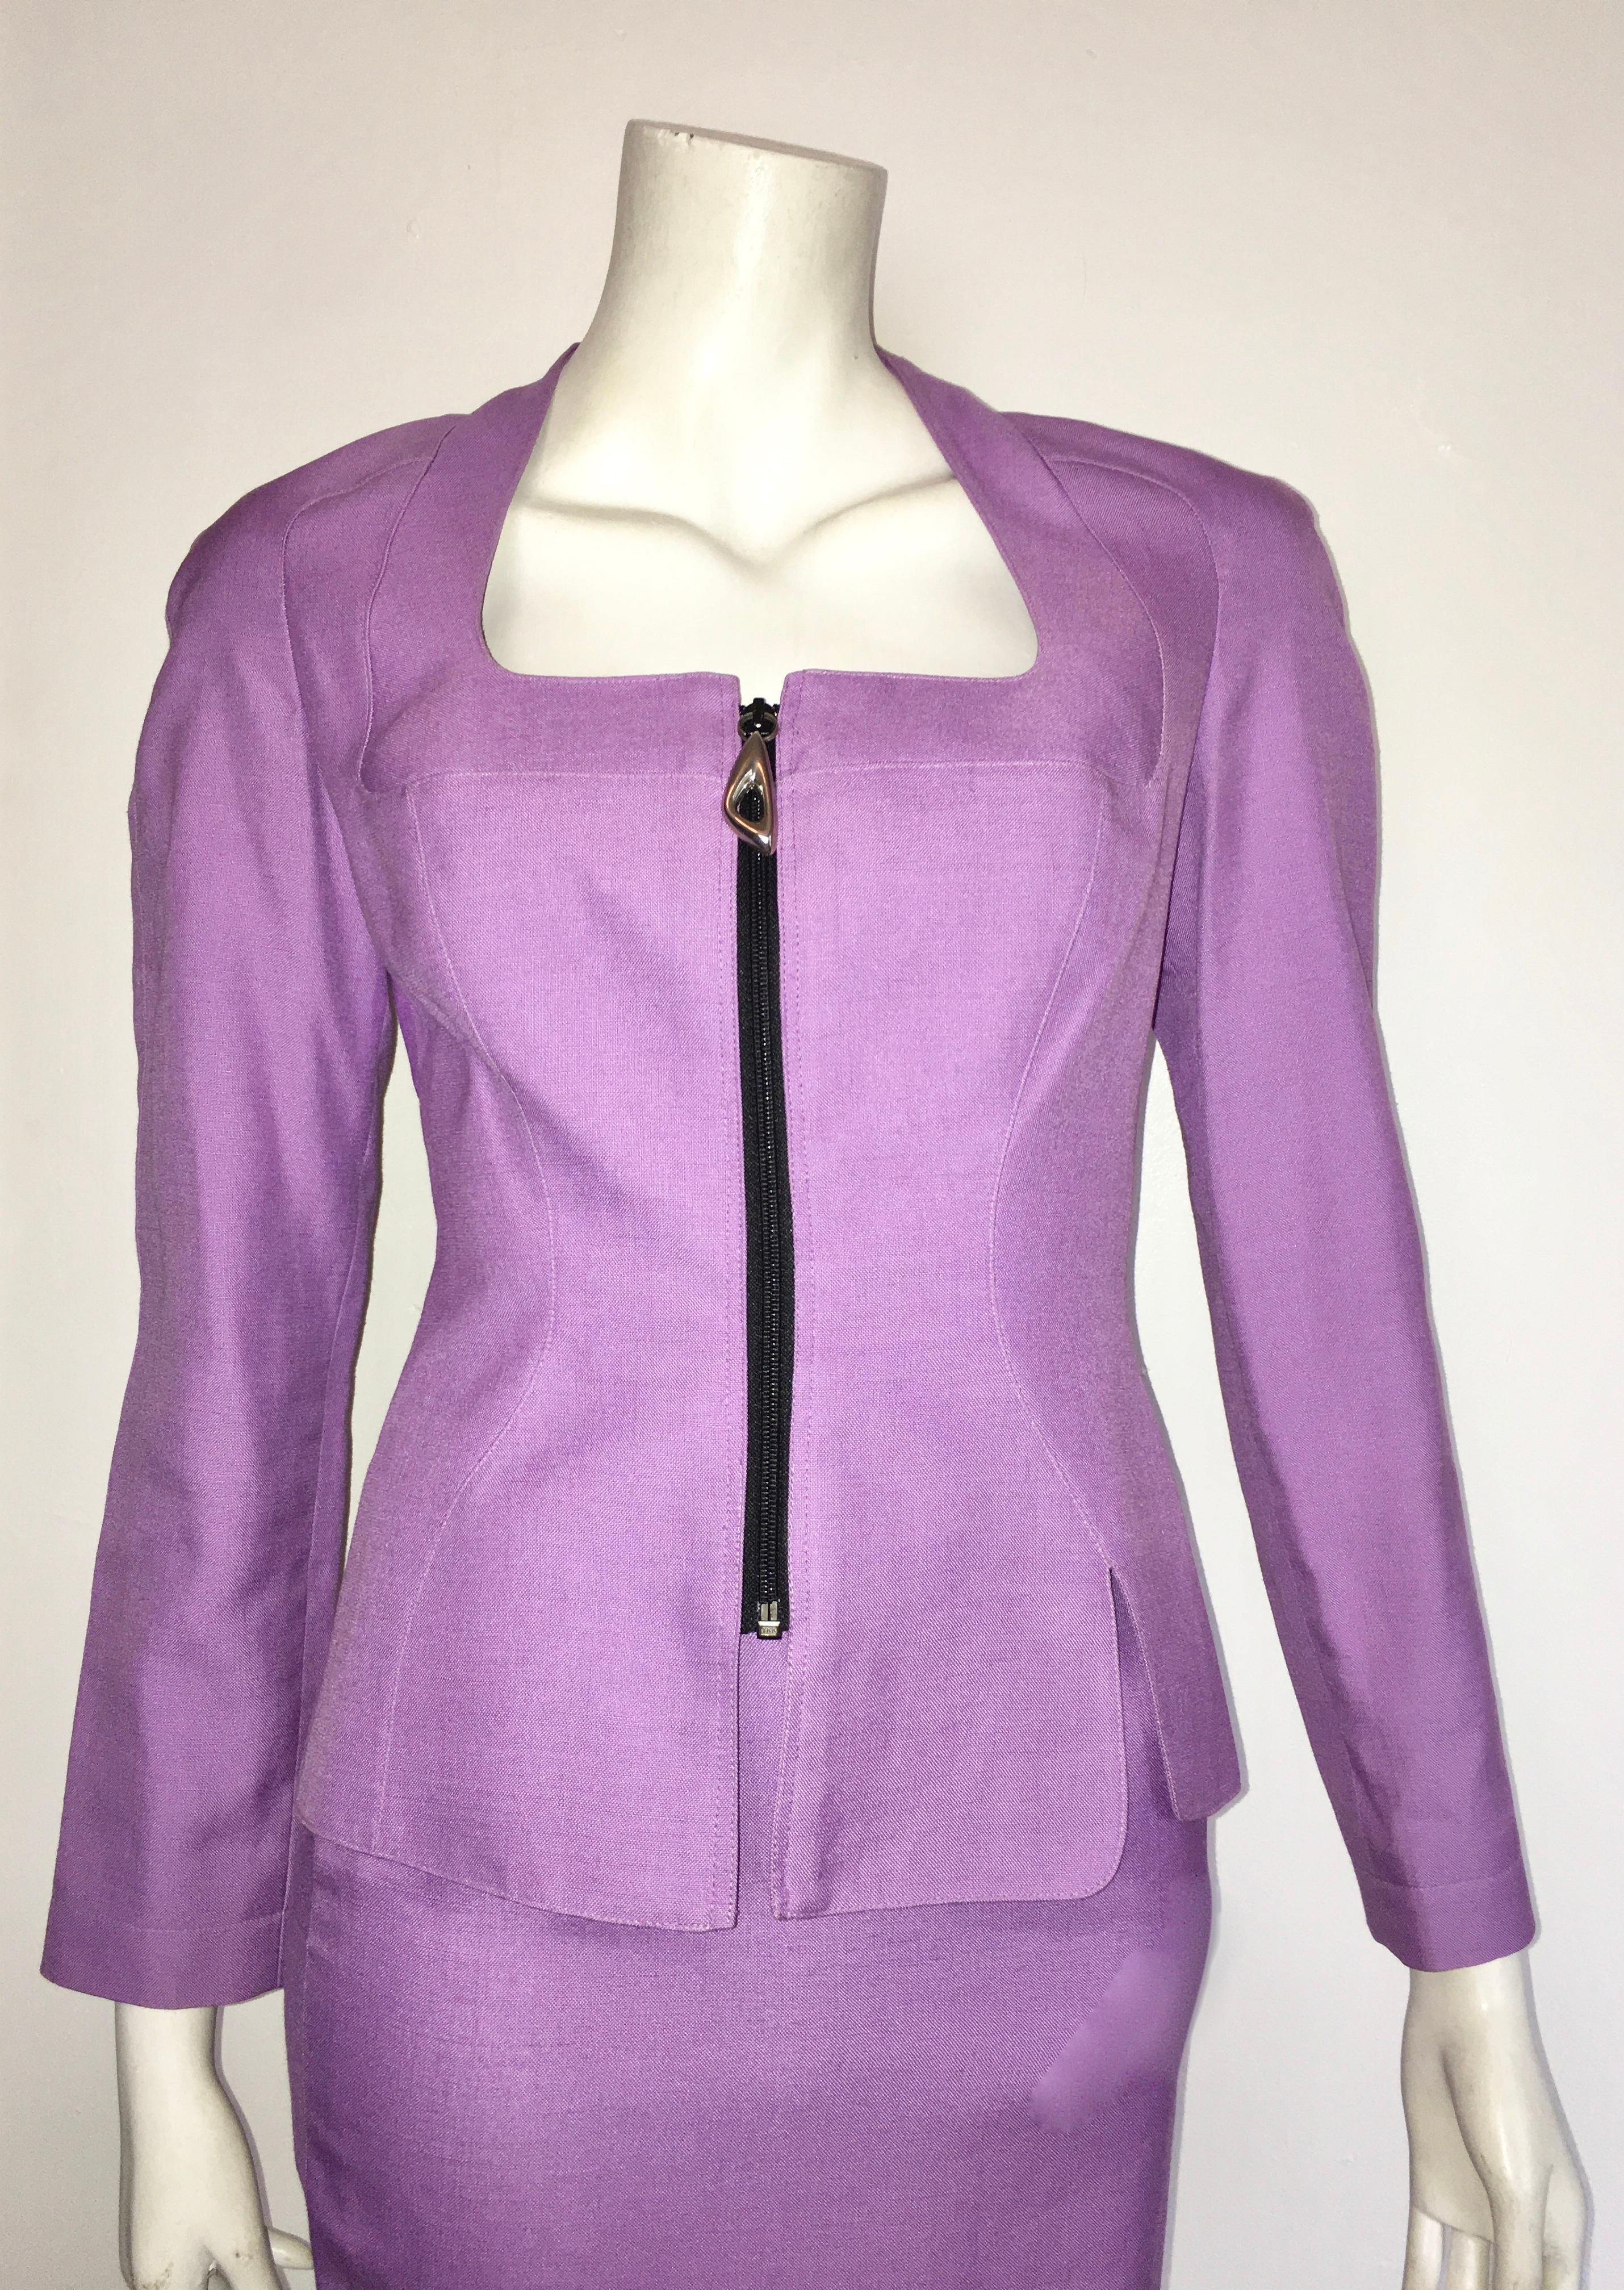 Thierry Mugler 1990s lilac zipper jacket with matching pencil skirt is a French size 36 and a USA size 4.  The waist on the skirt is 25